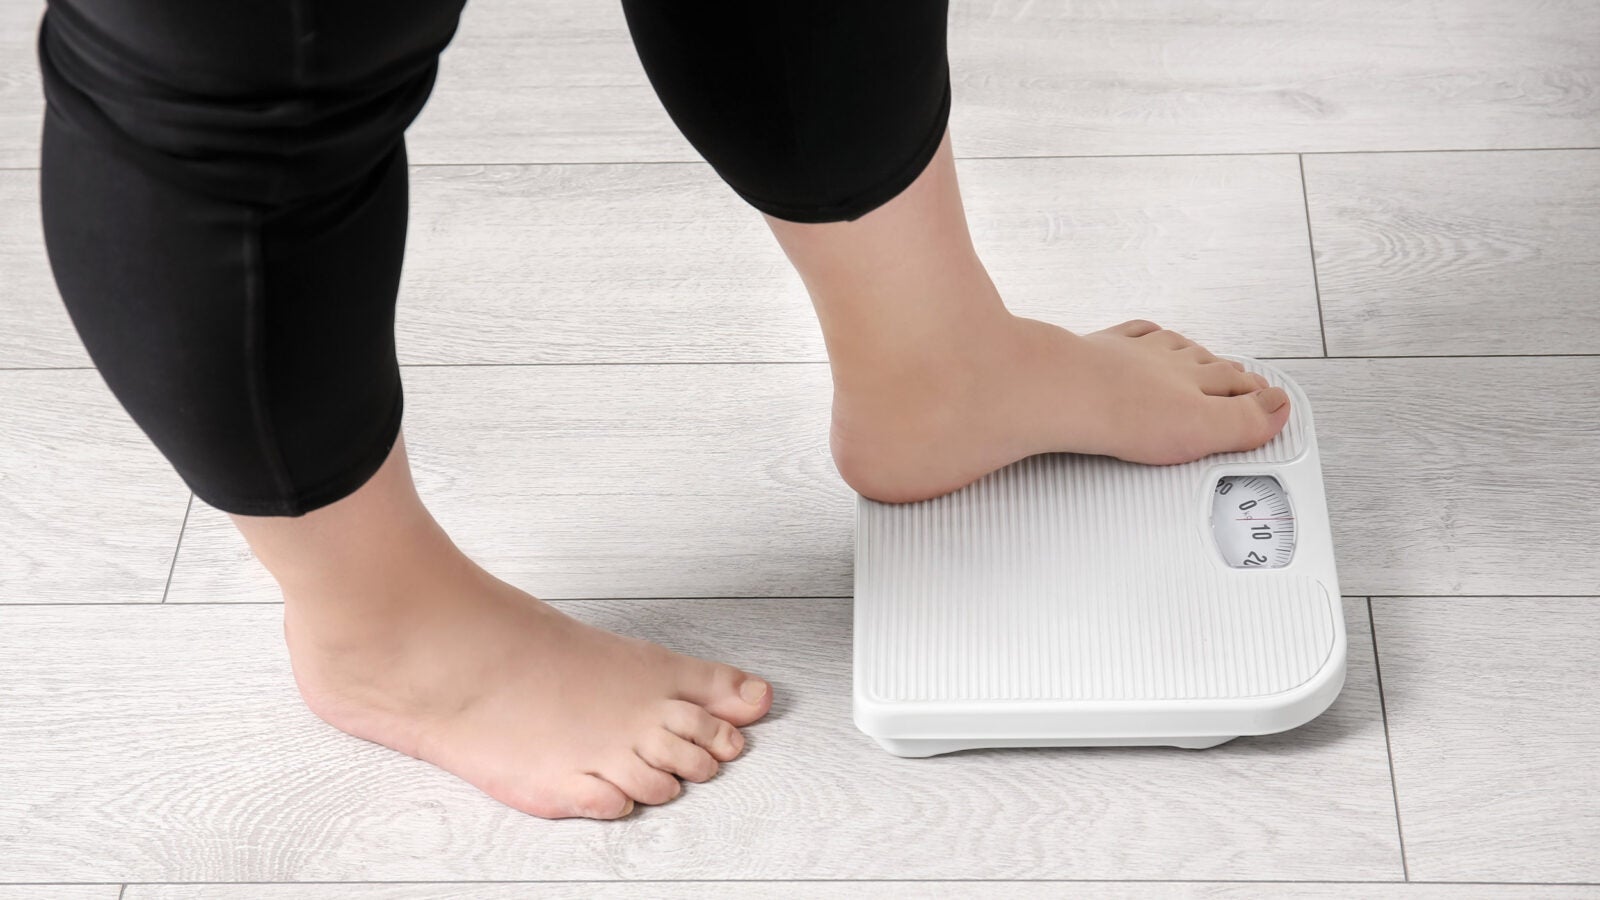 Overweight woman using scales indoors.